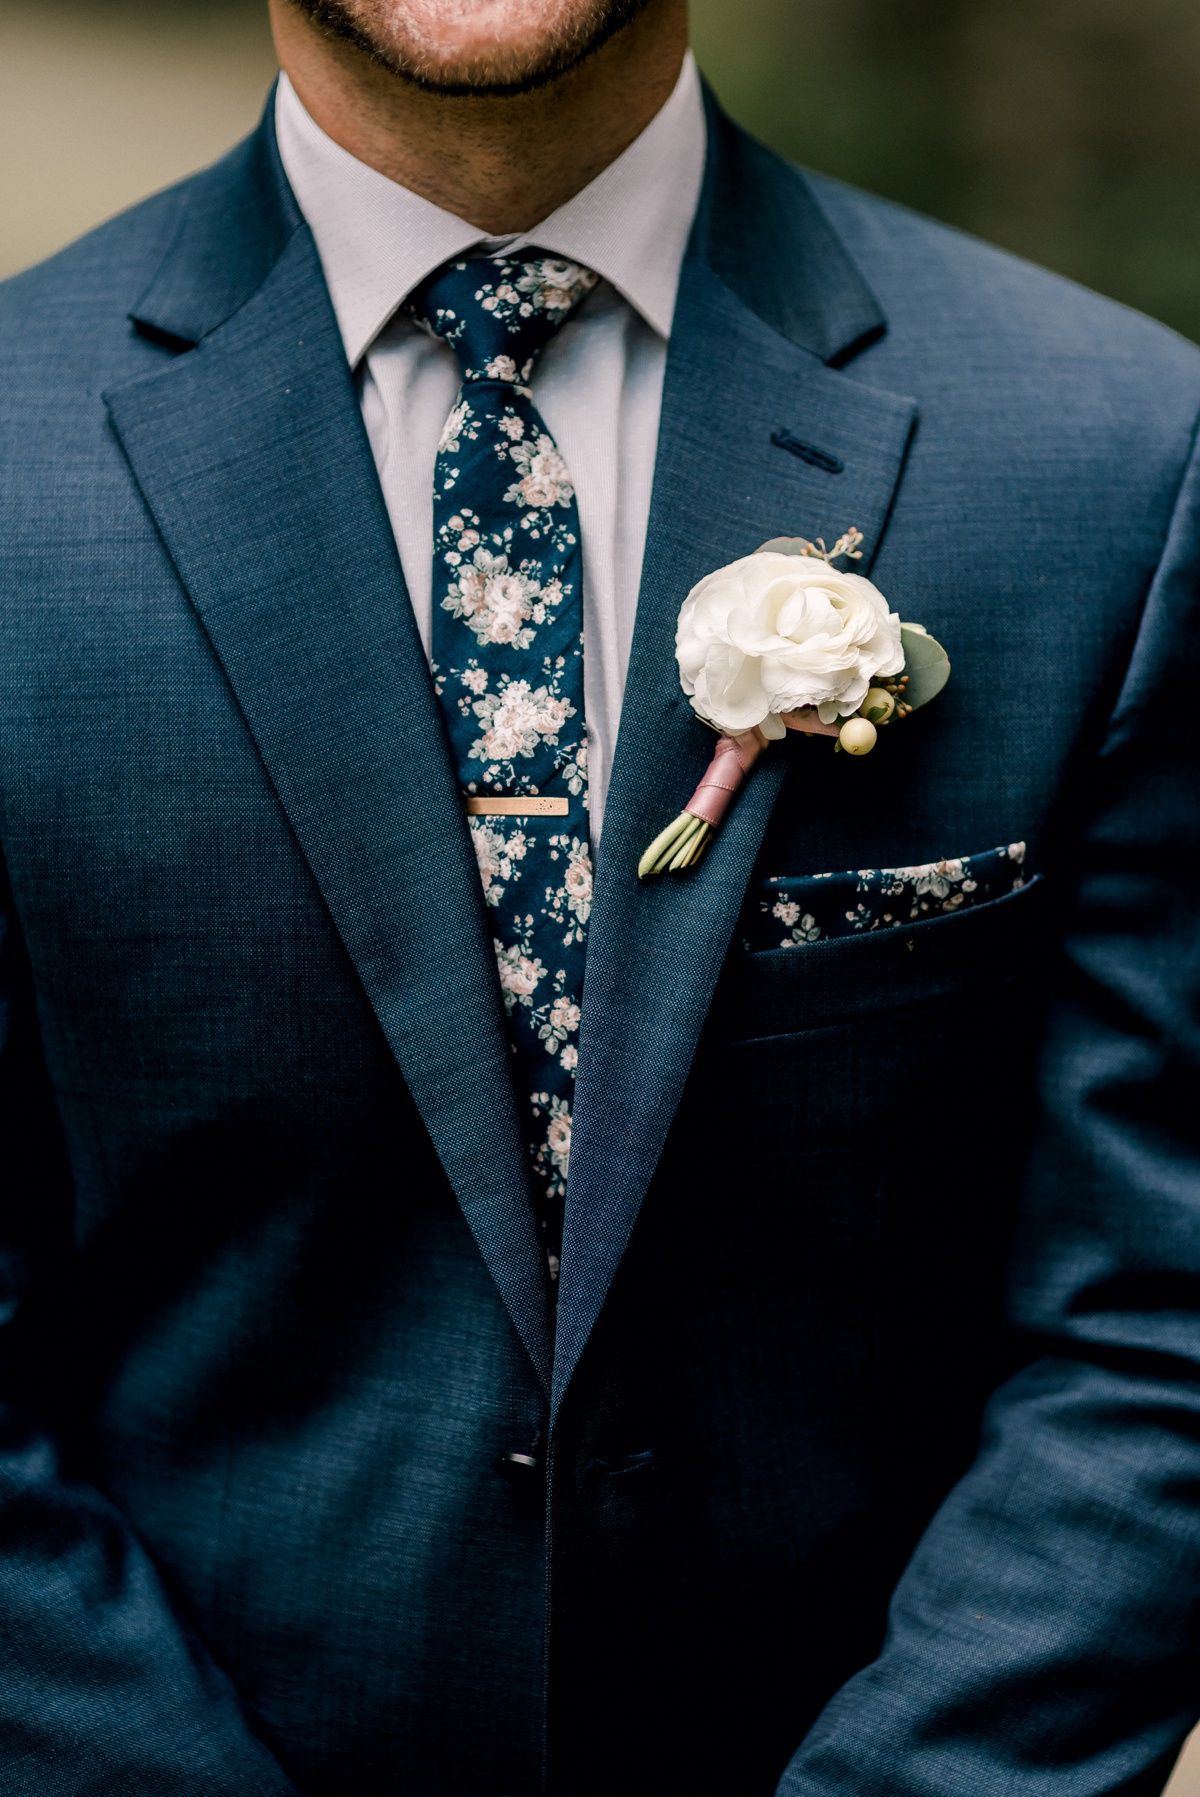 Top 15 Classic Suit for Men Meant for Amazing Groom Outfits